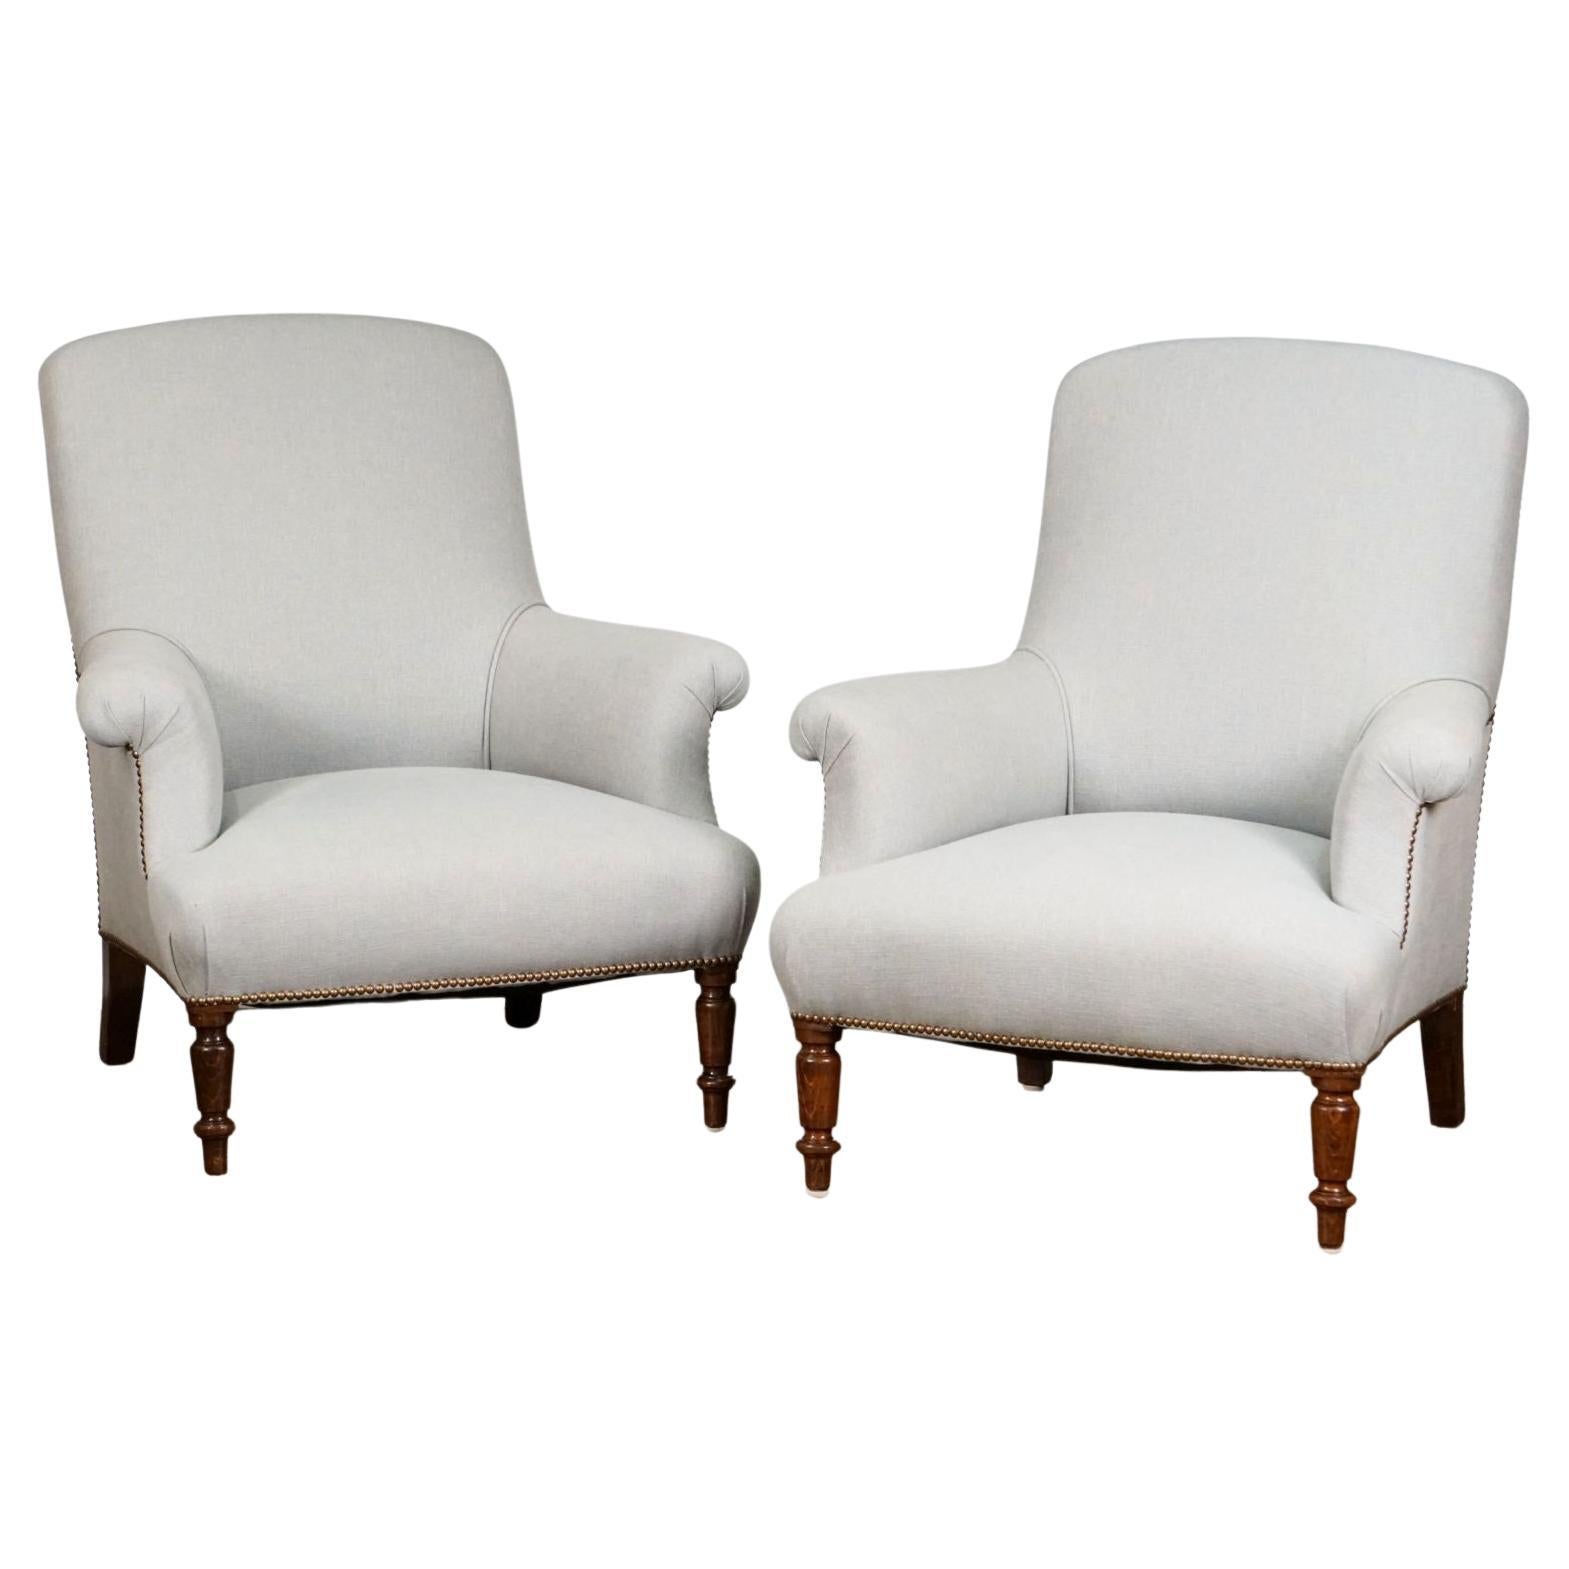 Pair of Upholstered Linen Armchairs from France - Individually Priced For Sale